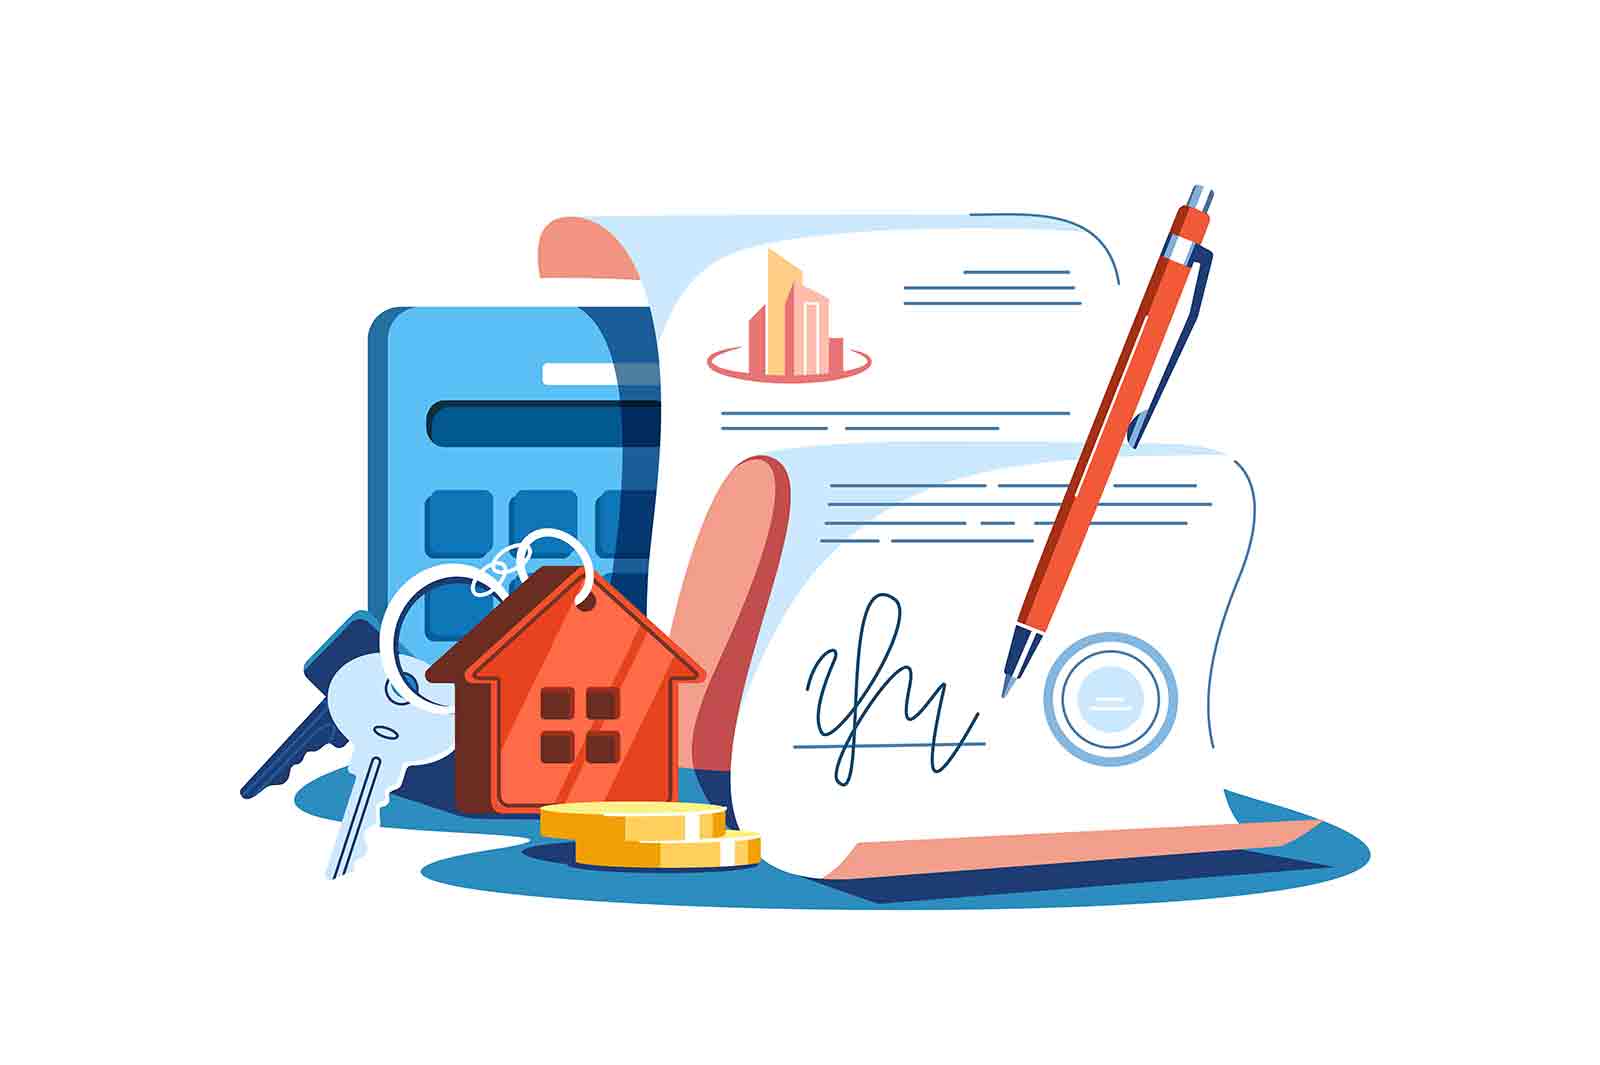 Property for sale and conclusion of treaty vector illustration. Contract papers flat style design. Calculator, papers and bunch of keys, paper work